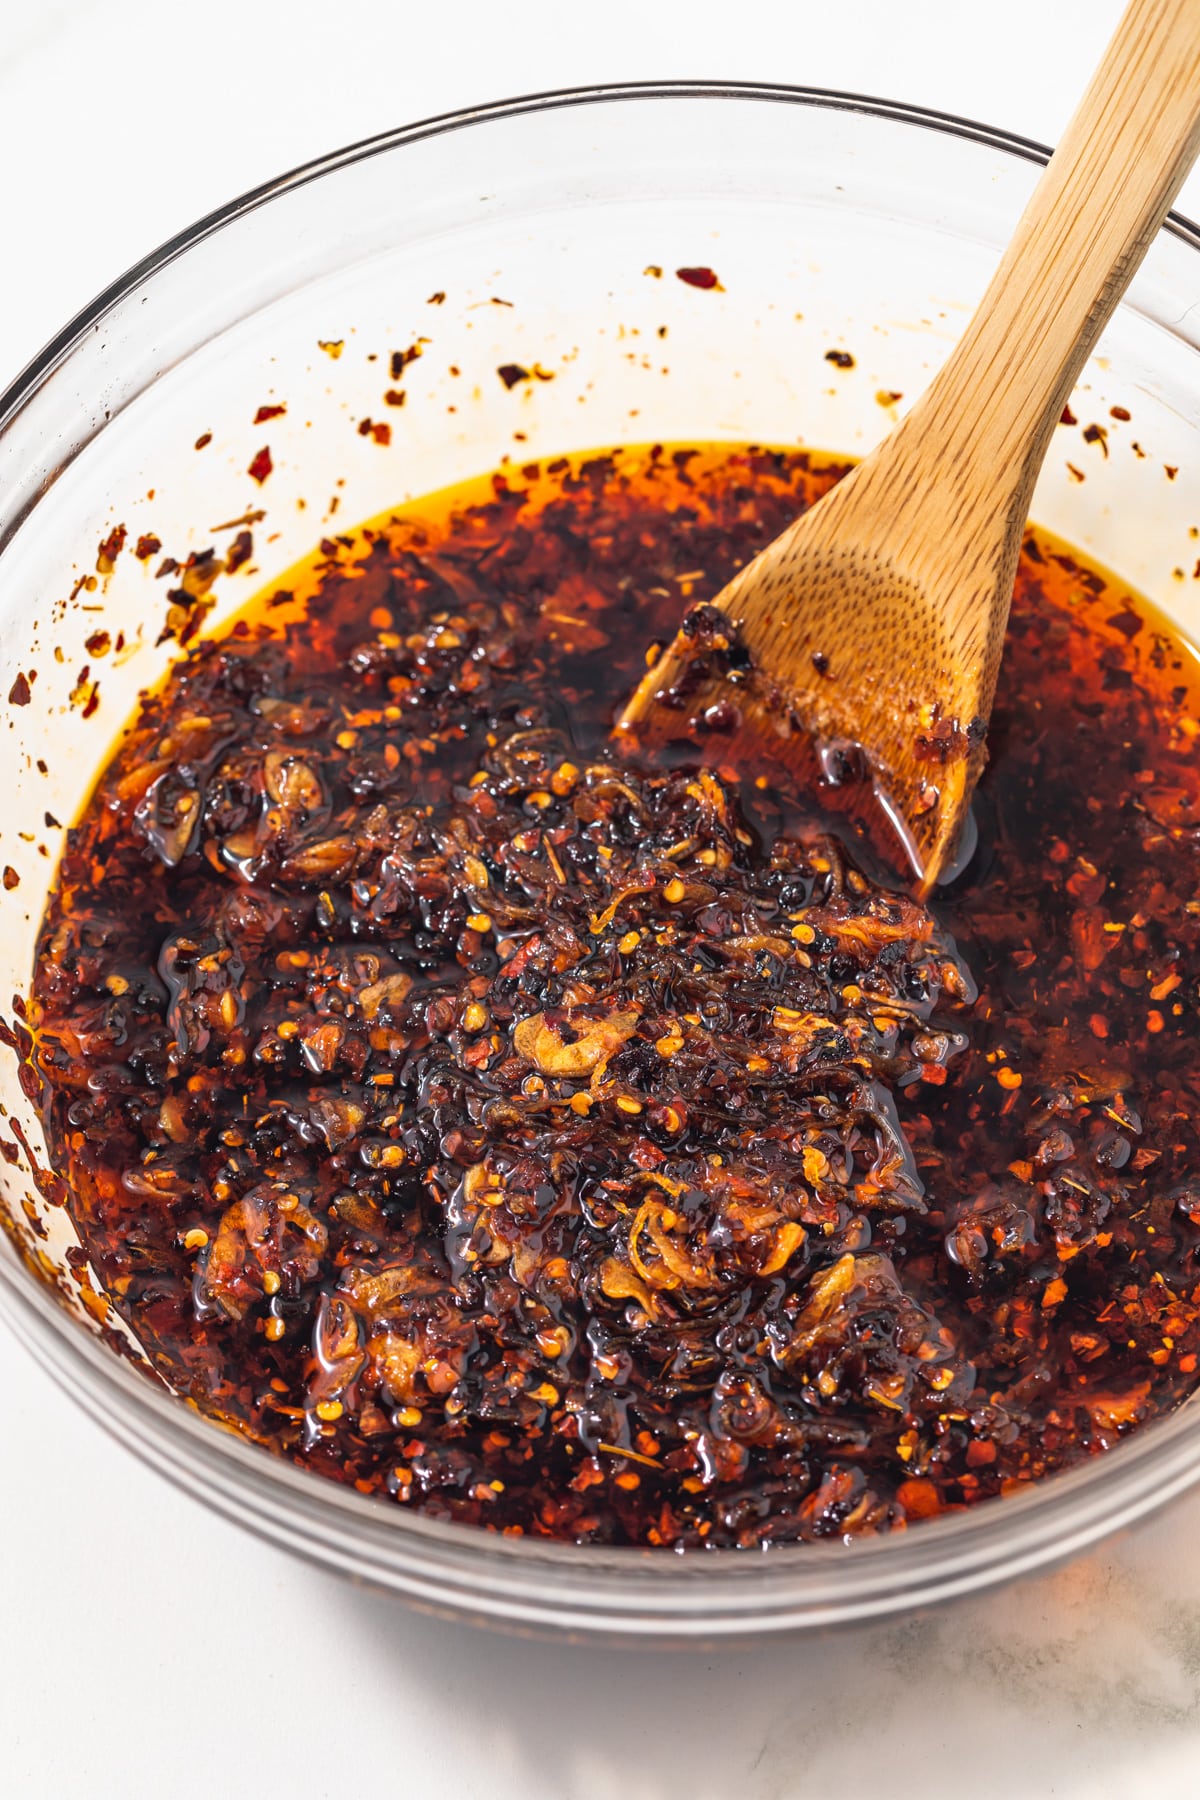 A bowl of crispy chili oil with a wooden spoon.